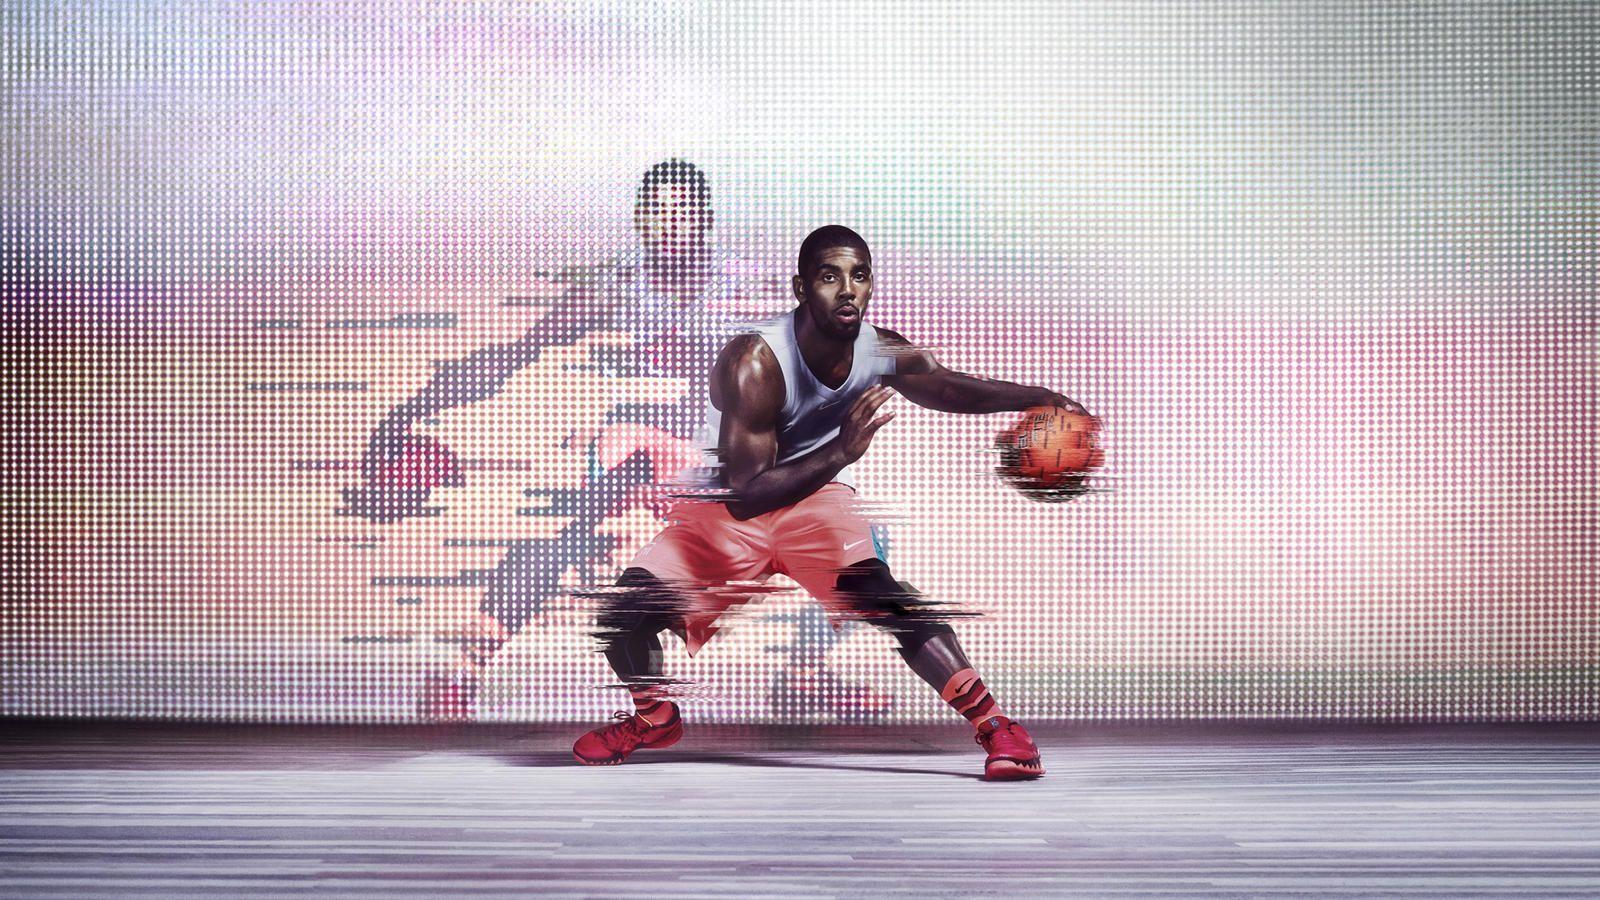 Nike Welcomes Kyrie Irving to its Esteemed Signature Athlete Family